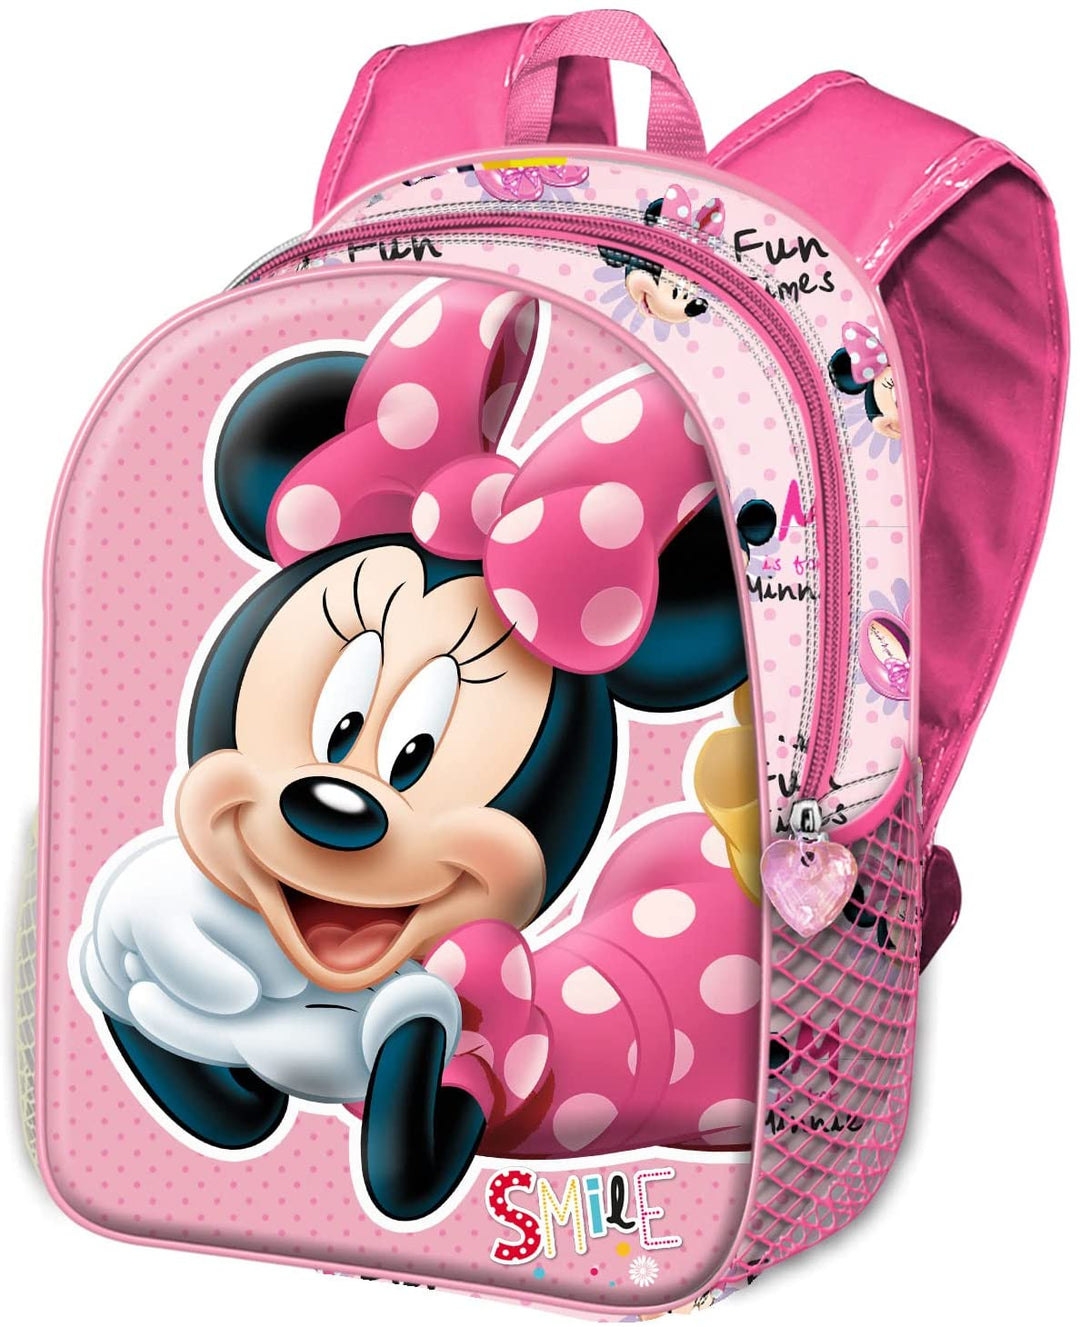 Minnie Mouse Lying-Small 3D Backpack, Pink